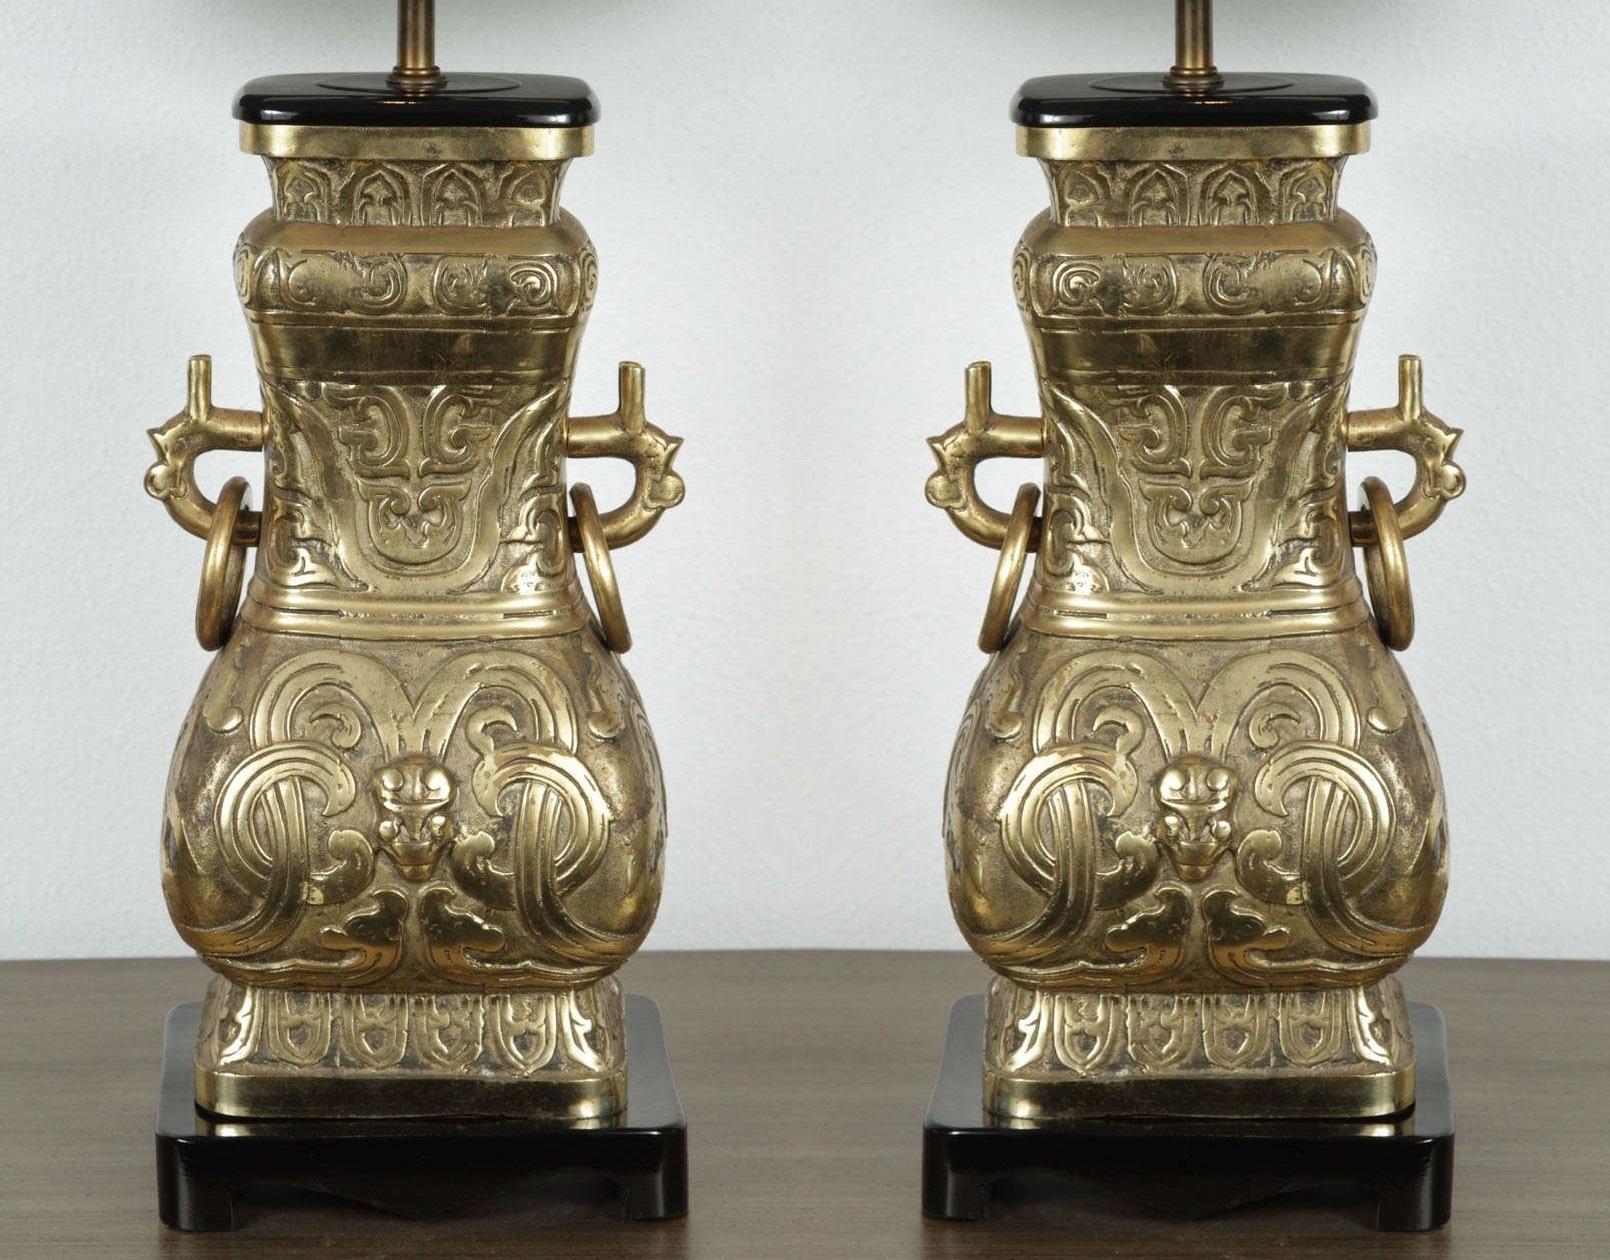 An impressive pair of chinoiserie-inspired brass table lamps in the manner of Hollywood Regency designer James Mont. Traditional form being a fang (square) interpretation of hu and gui archaic ritual bronzes from the Shang and Zhou dynasties. Such